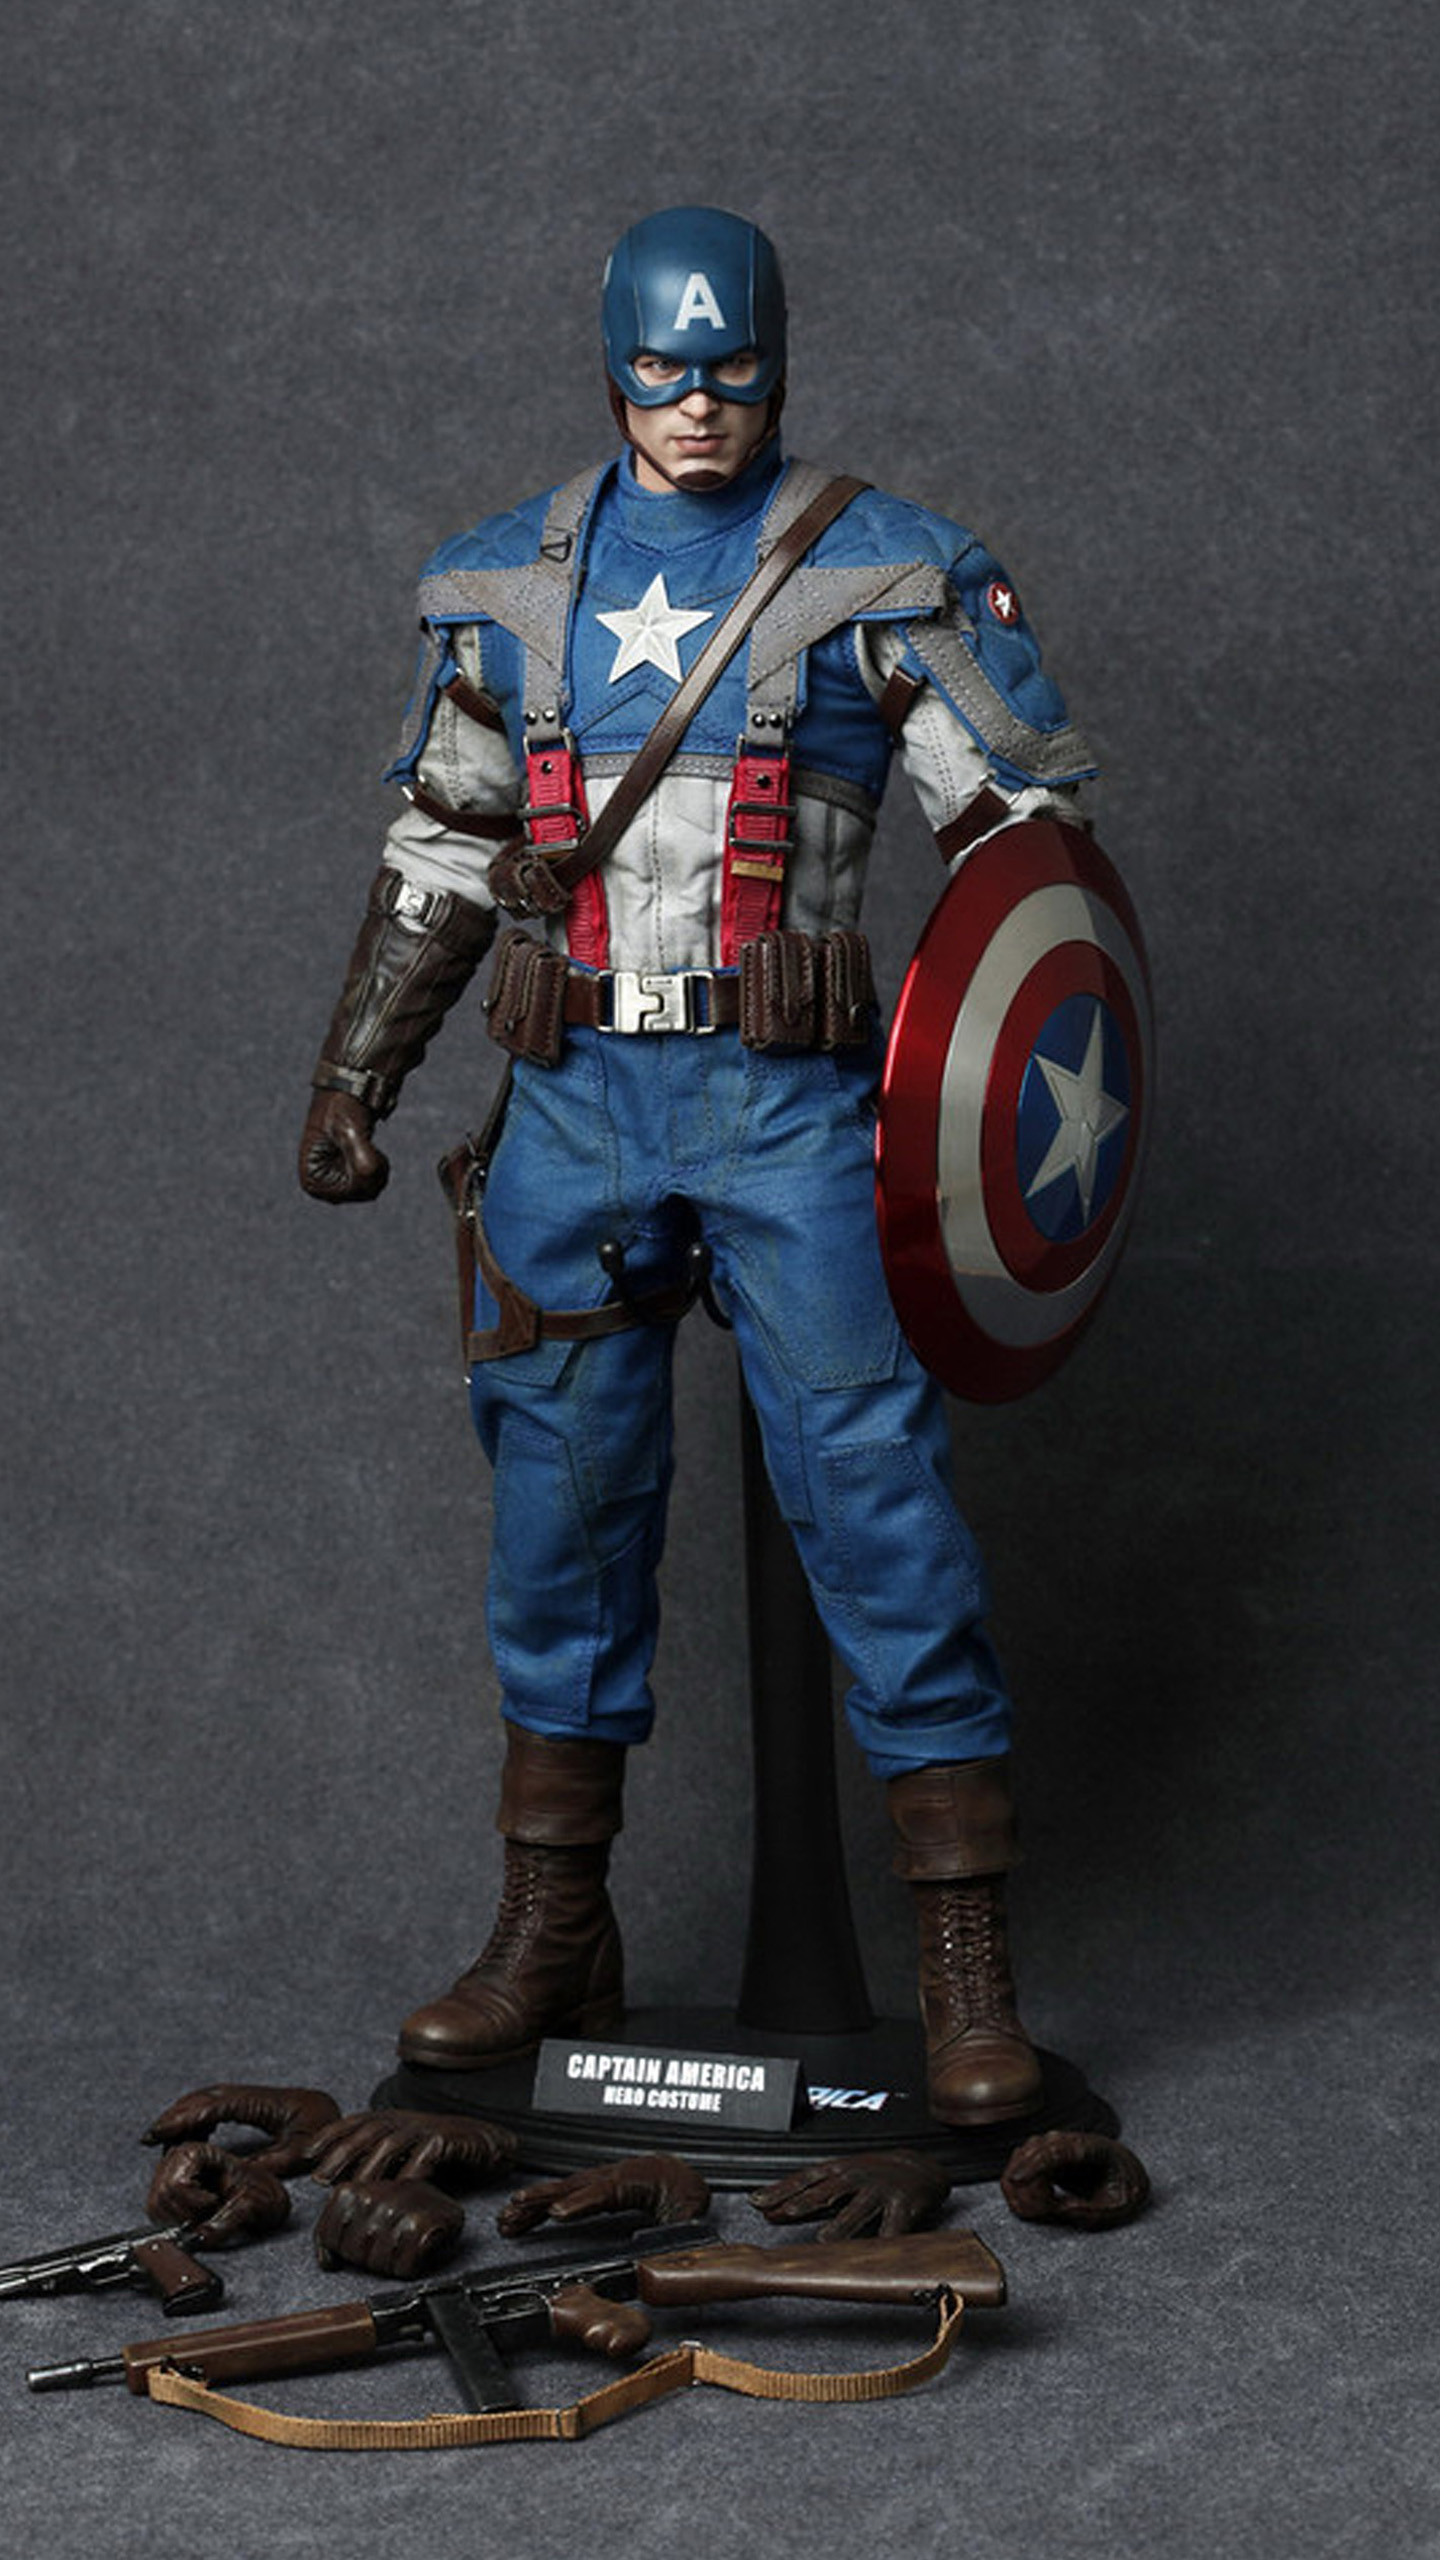 1440x2560 Captain America LG G3 Wallpapers